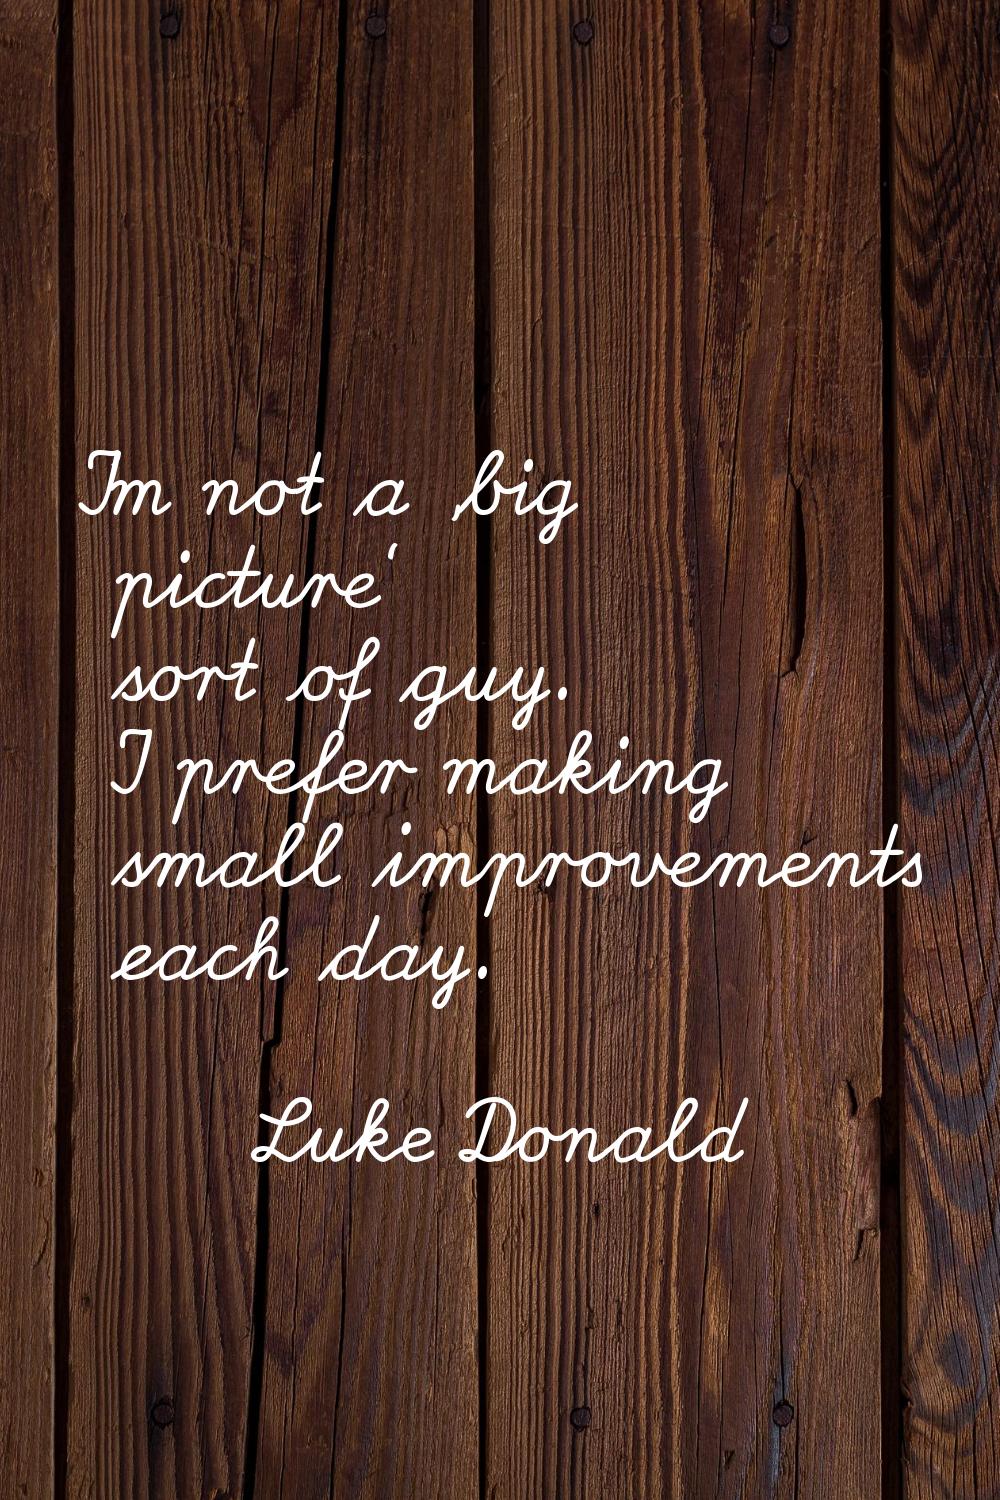 I'm not a 'big picture' sort of guy. I prefer making small improvements each day.